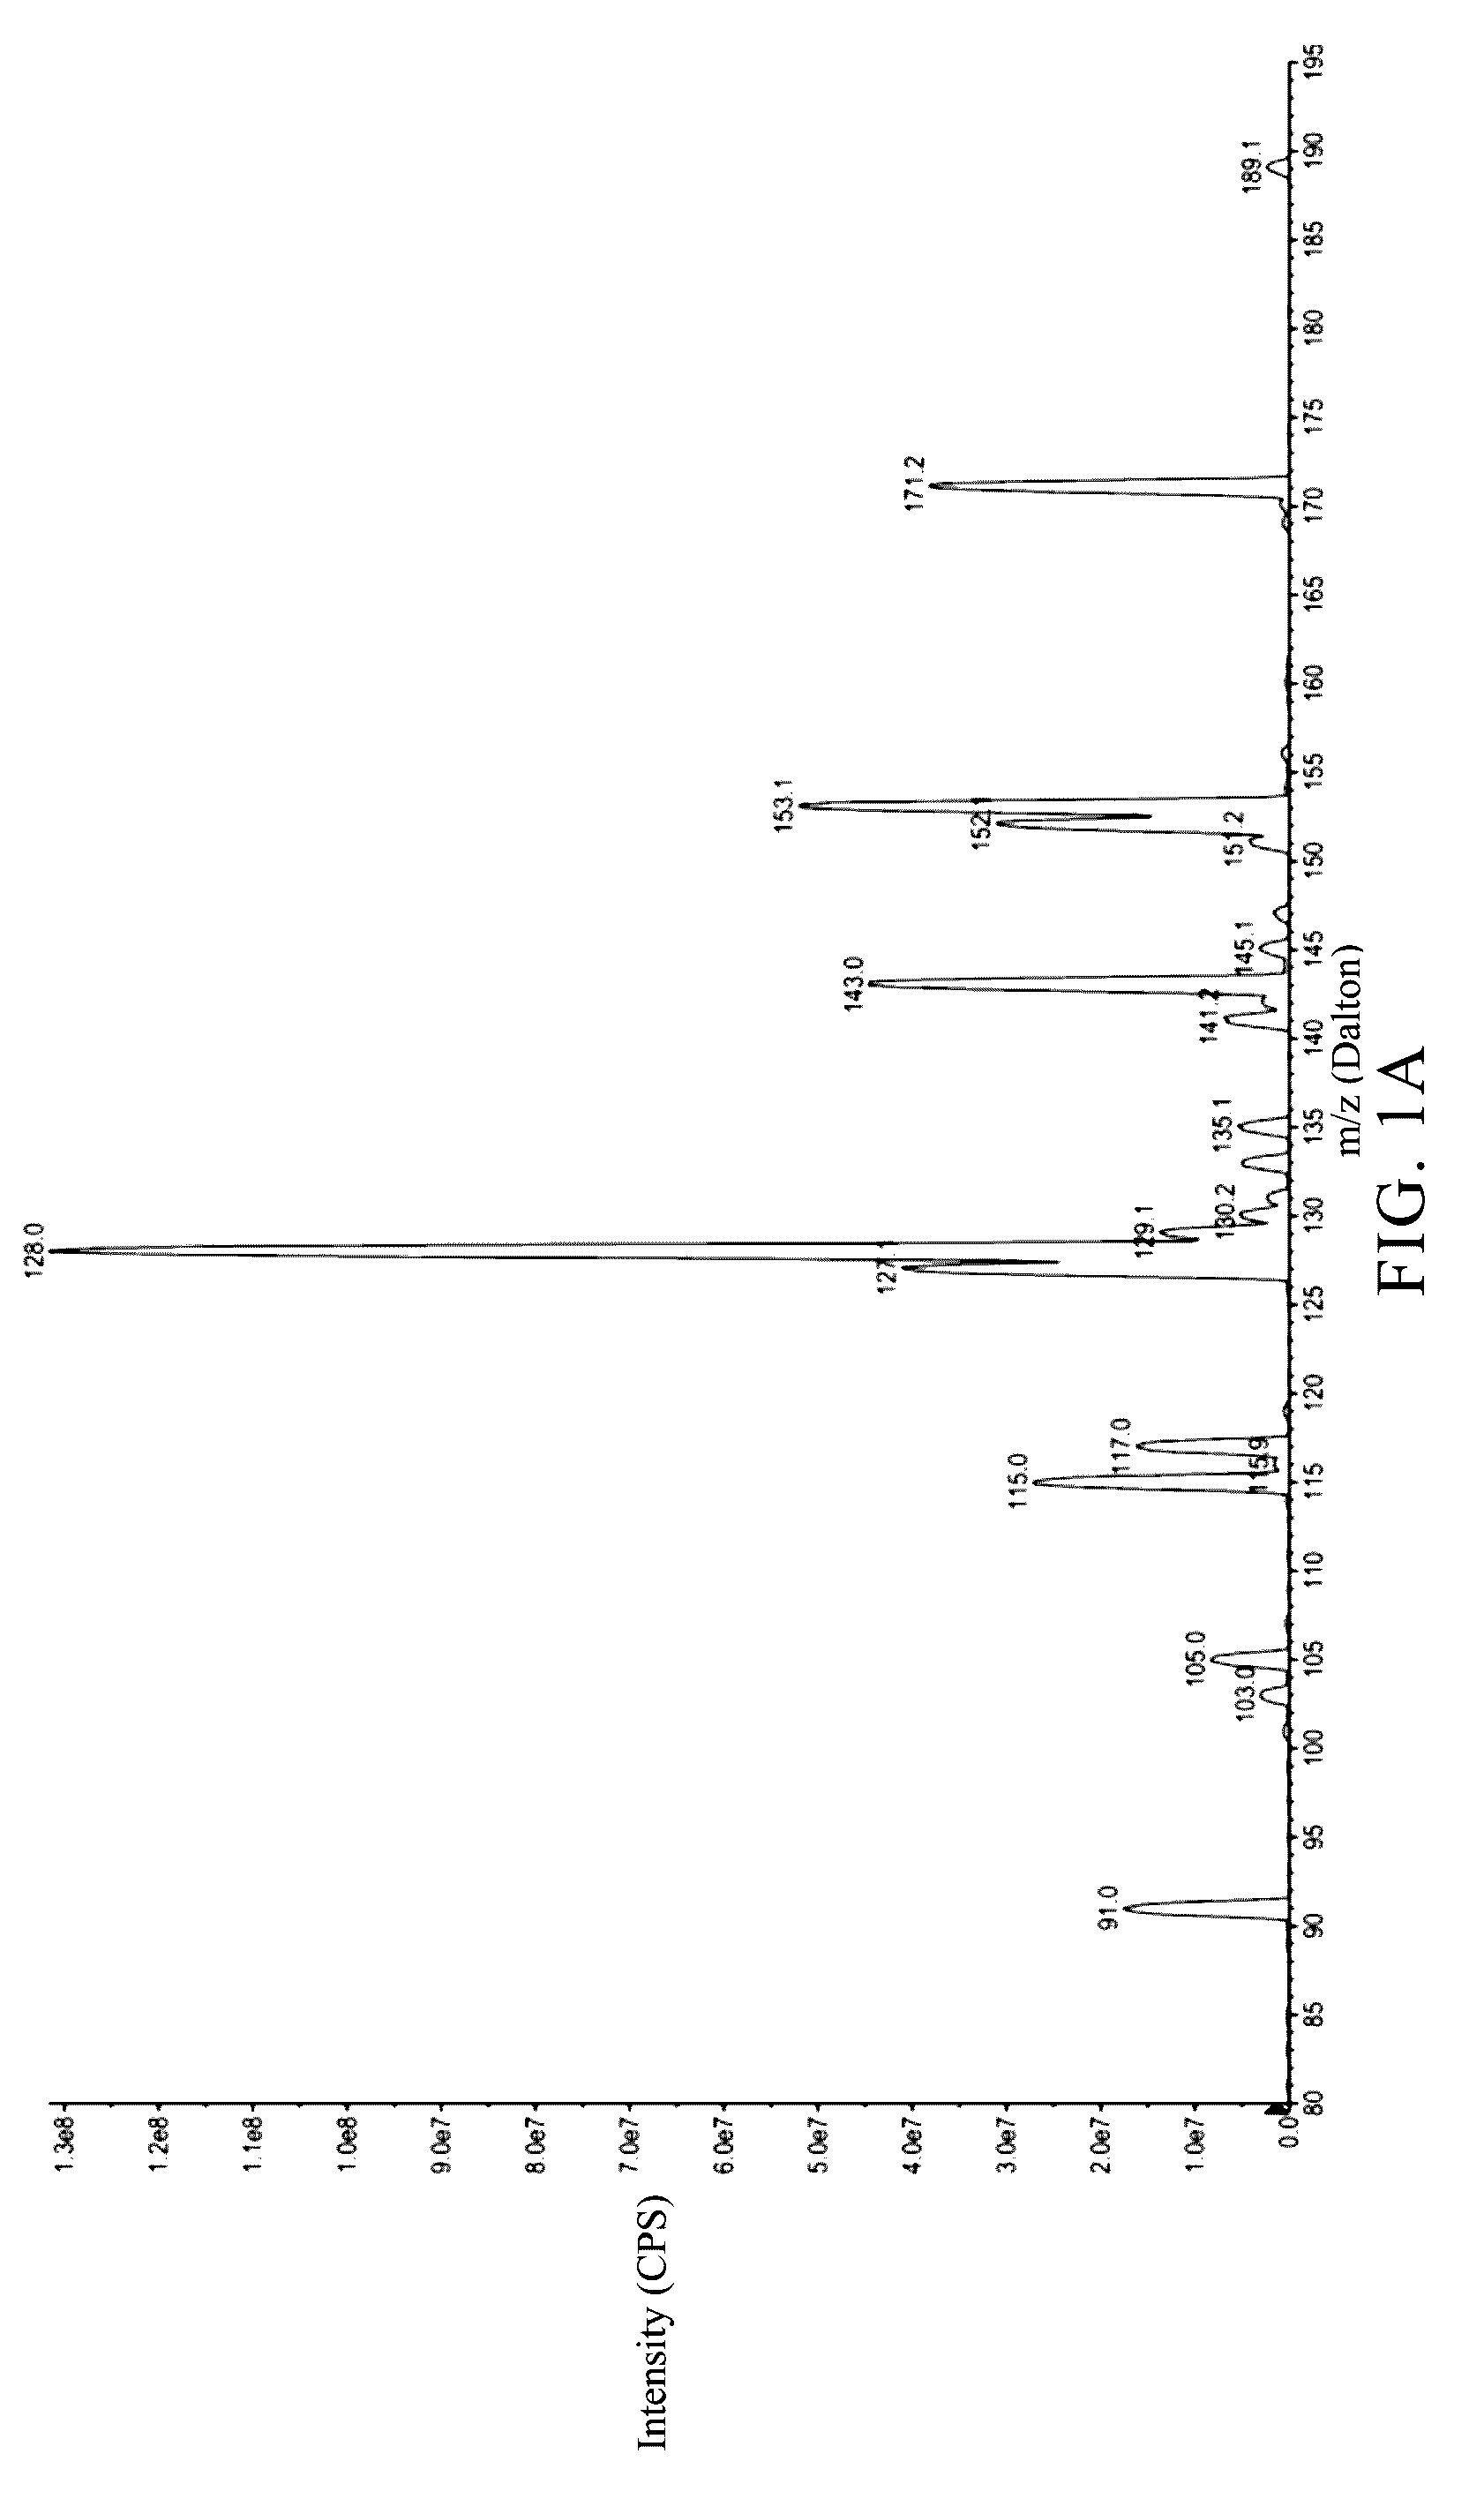 Method for providing an increased expression of telomerase, brain-derived neurotrophic factor, stromal cell-derived factor-1, cxc chemokine receptor 4, and/or immune regulatory factor of stem cell